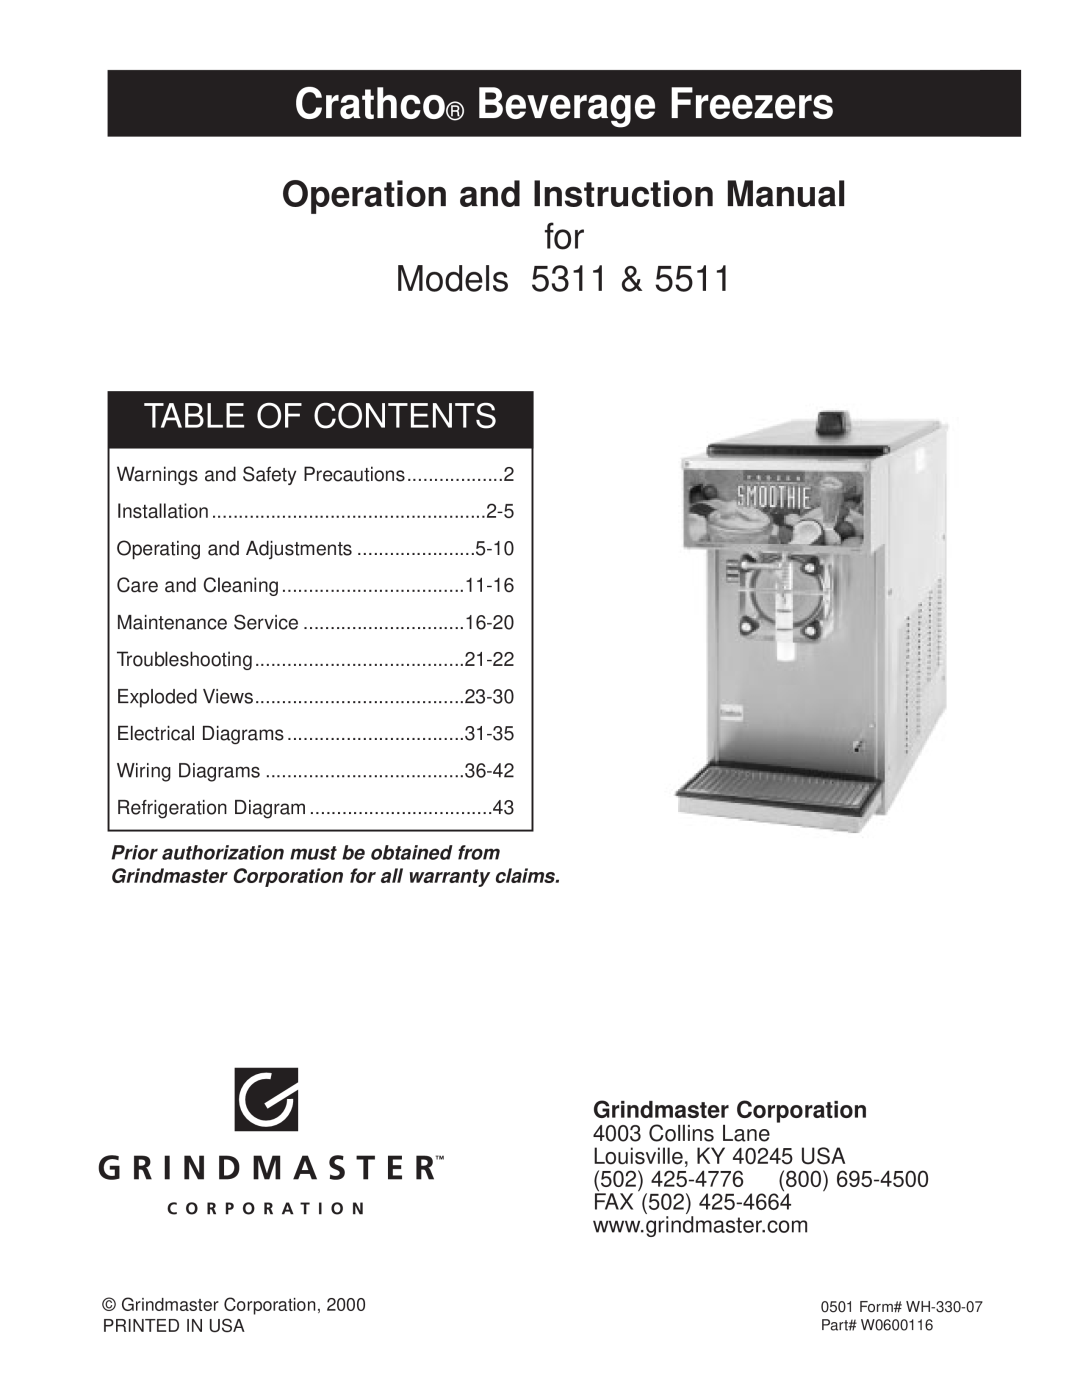 Grindmaster instruction manual Prior authorization must be obtained from, Crathco Beverage Freezers, for Models 5311 